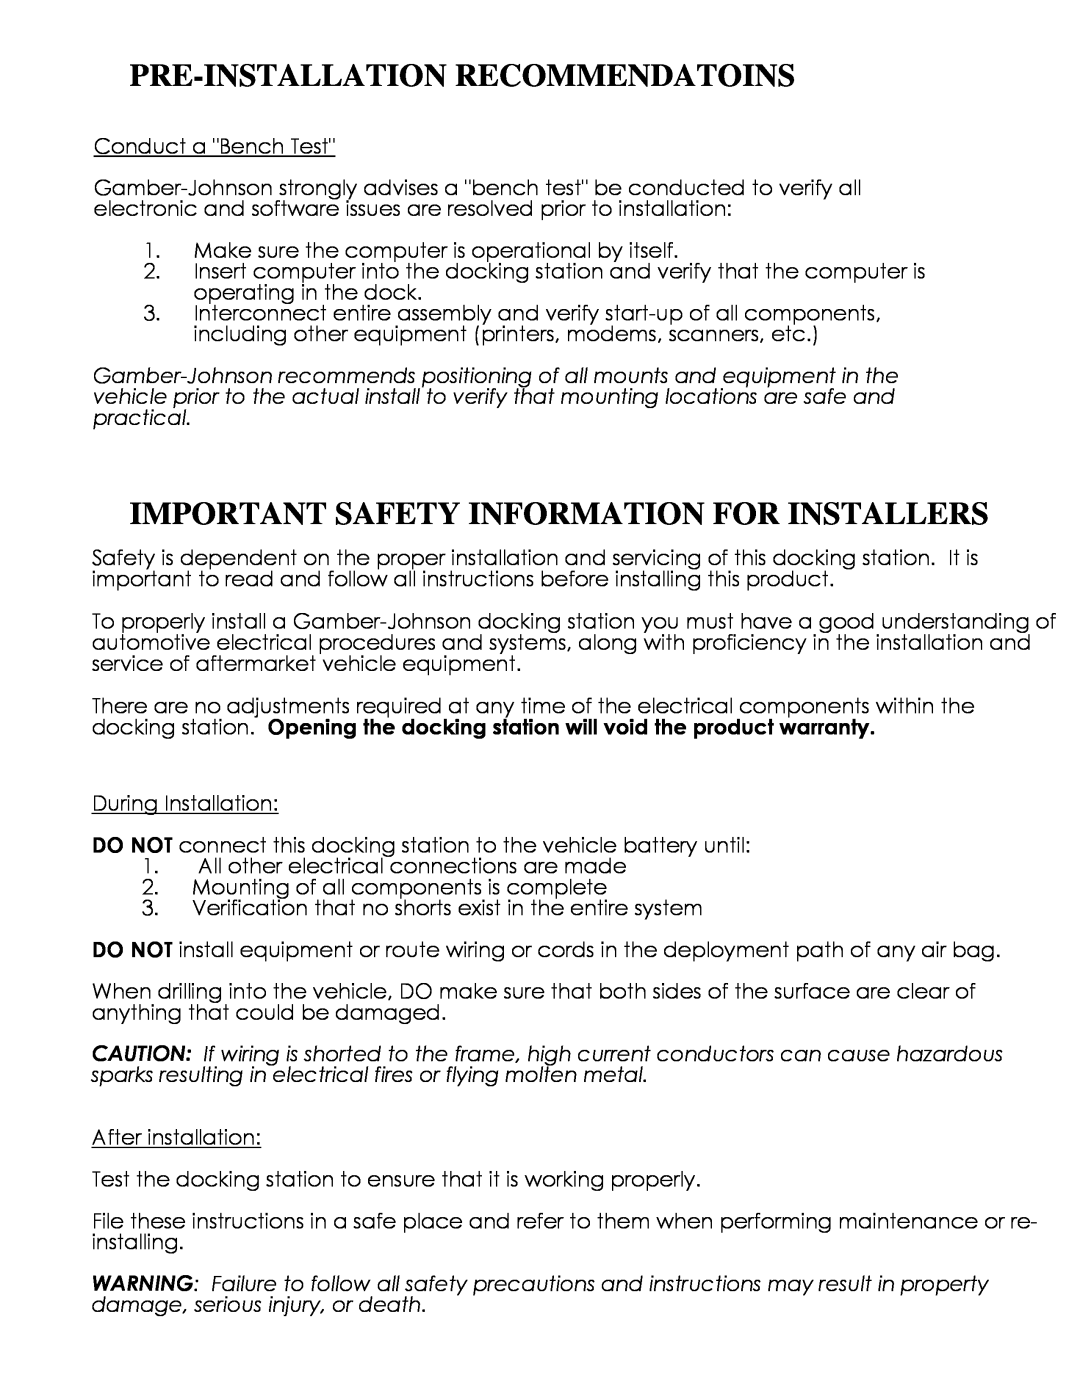 Gamber Johnson CF53 installation instructions Pre-Installation Recommendatoins, Important Safety Information For Installers 